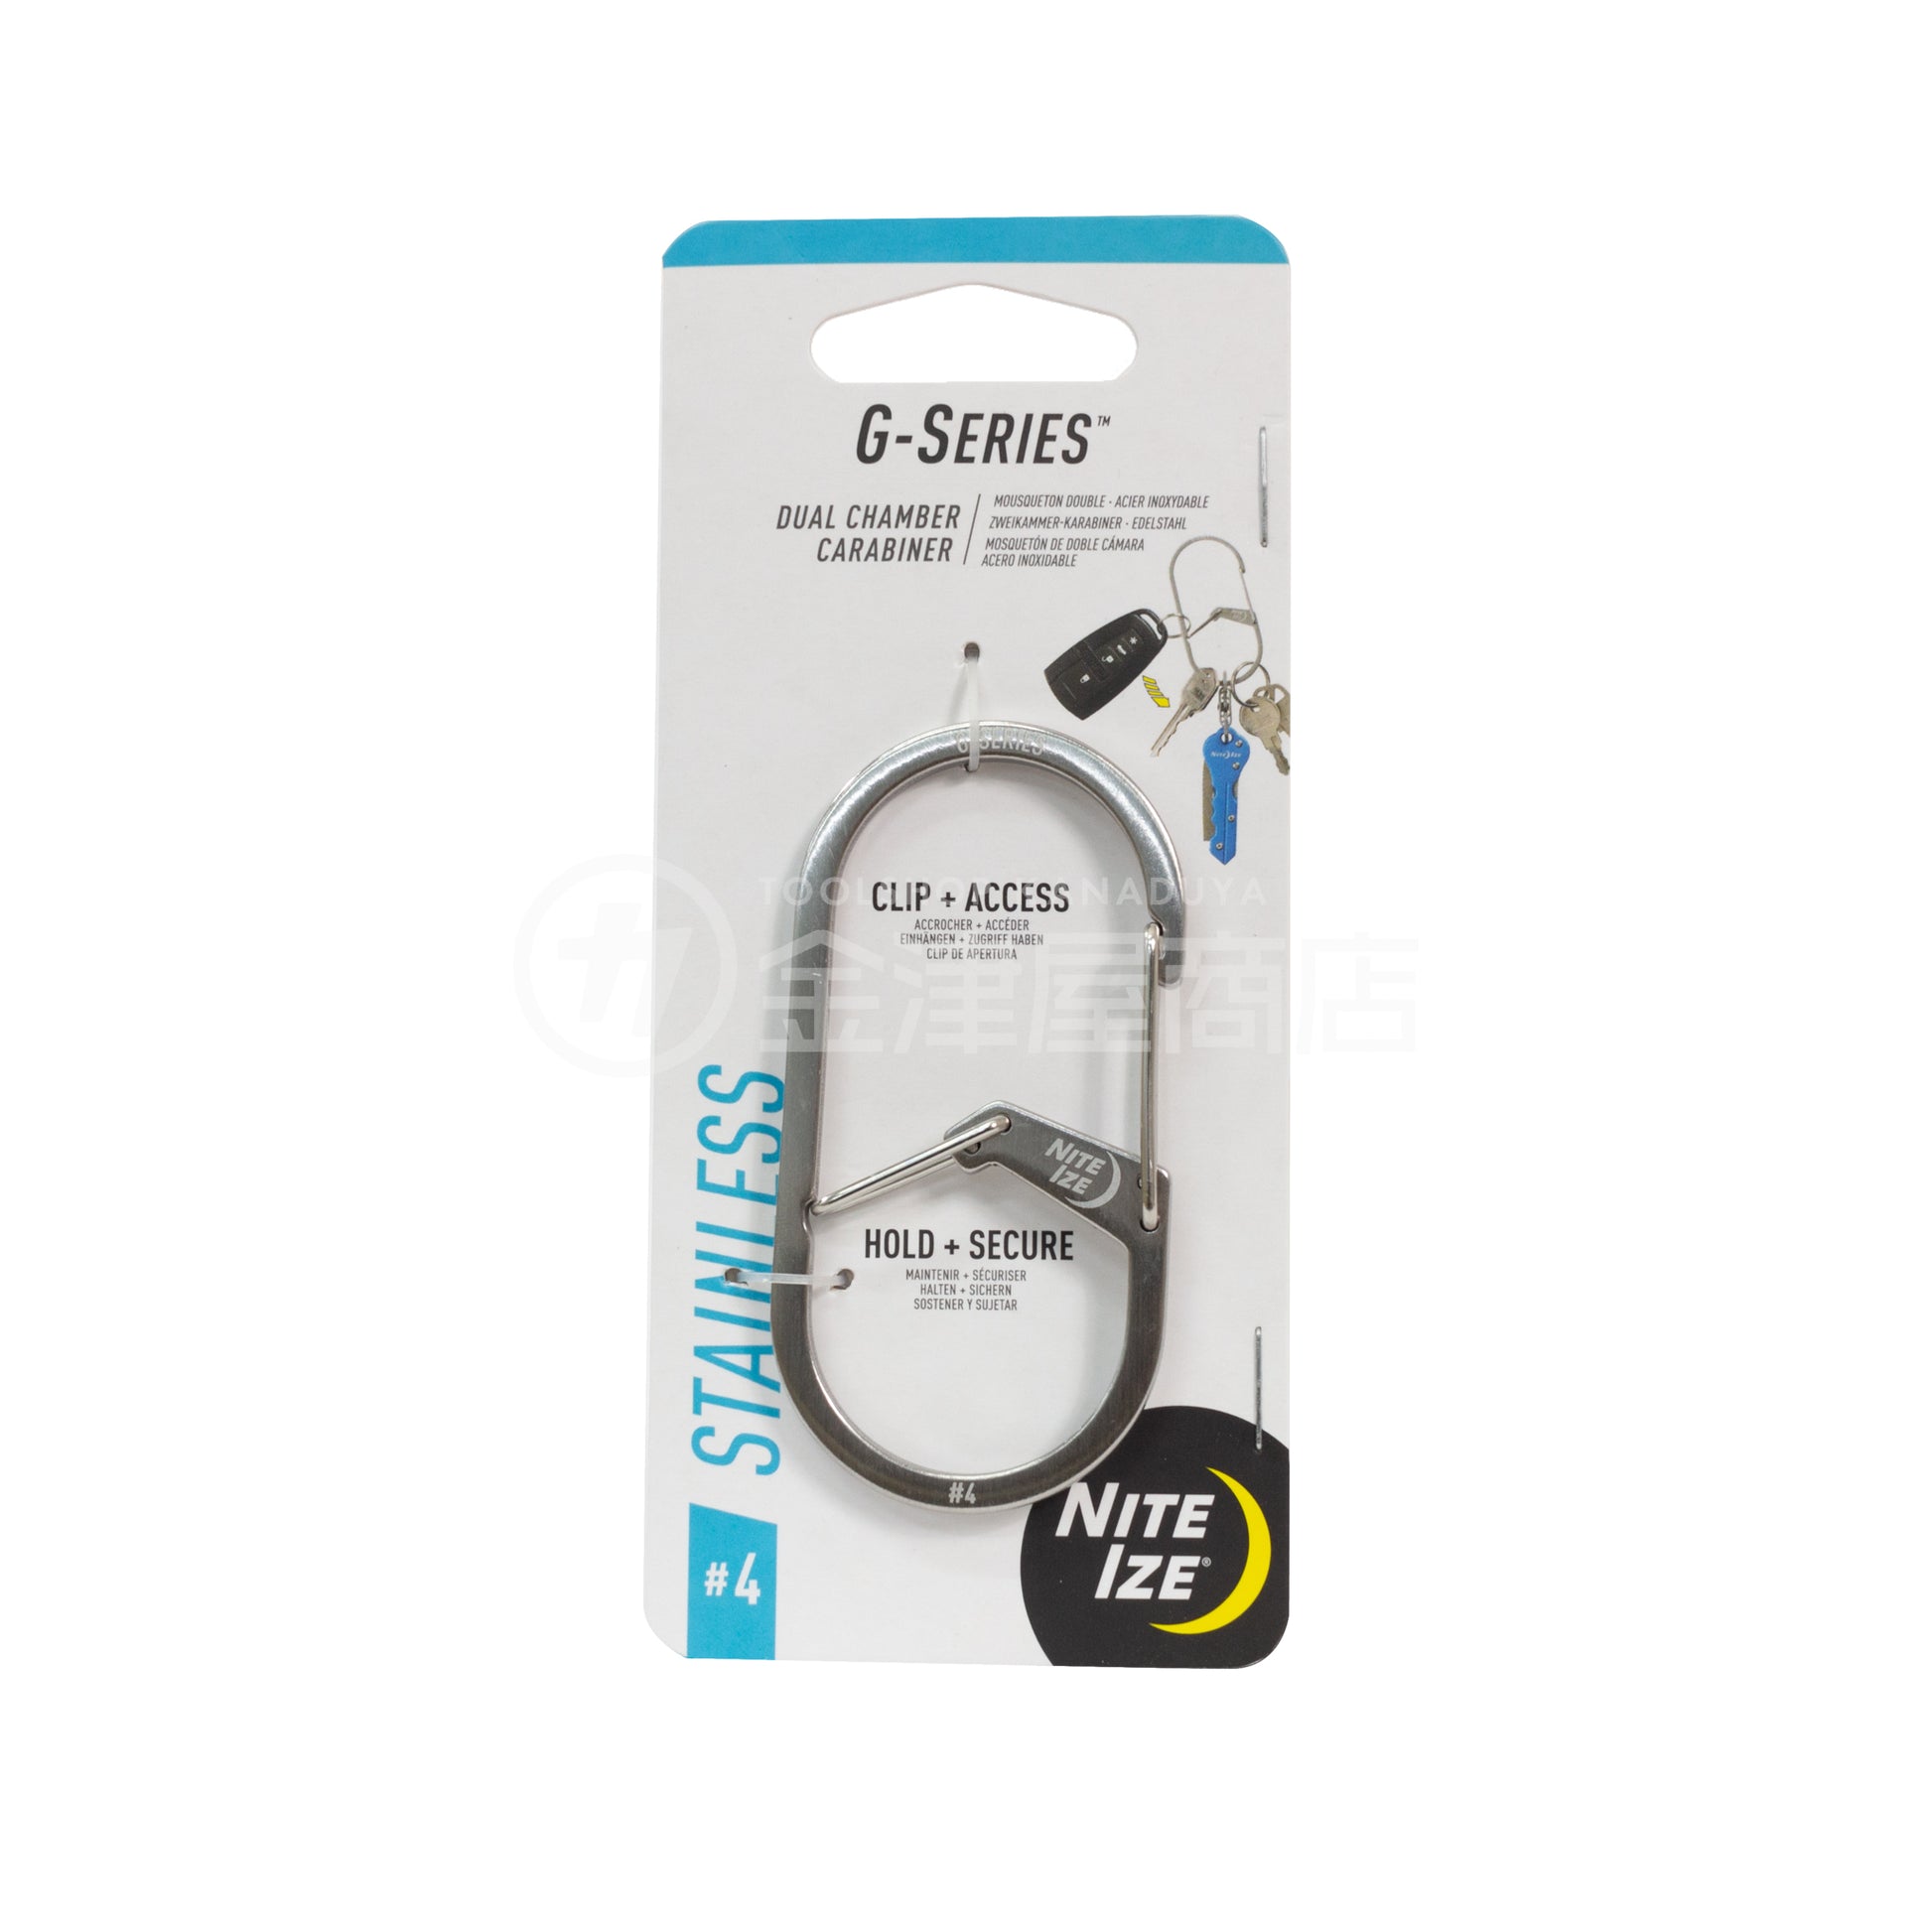 NITEIZE Stainless G Carabiner #4